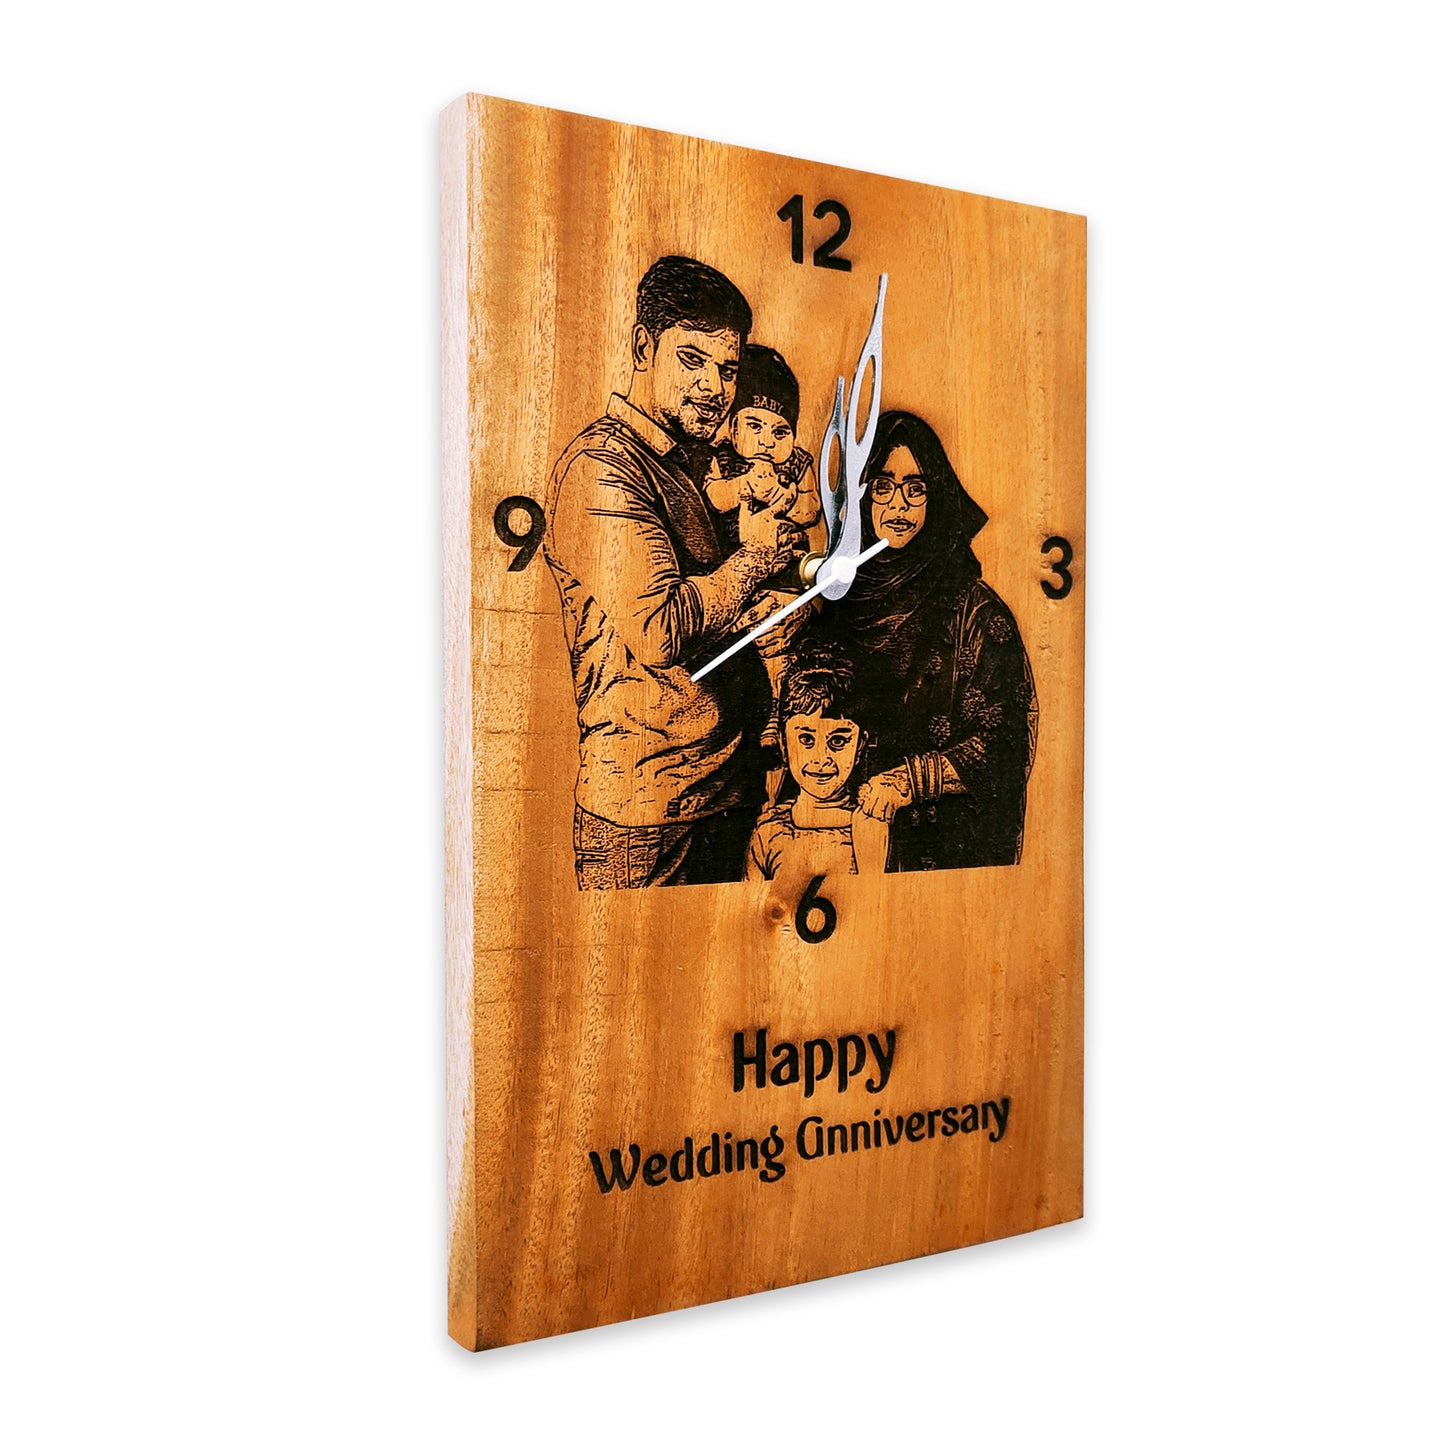 Personalized Photo Engraved Wooden Wall Clock